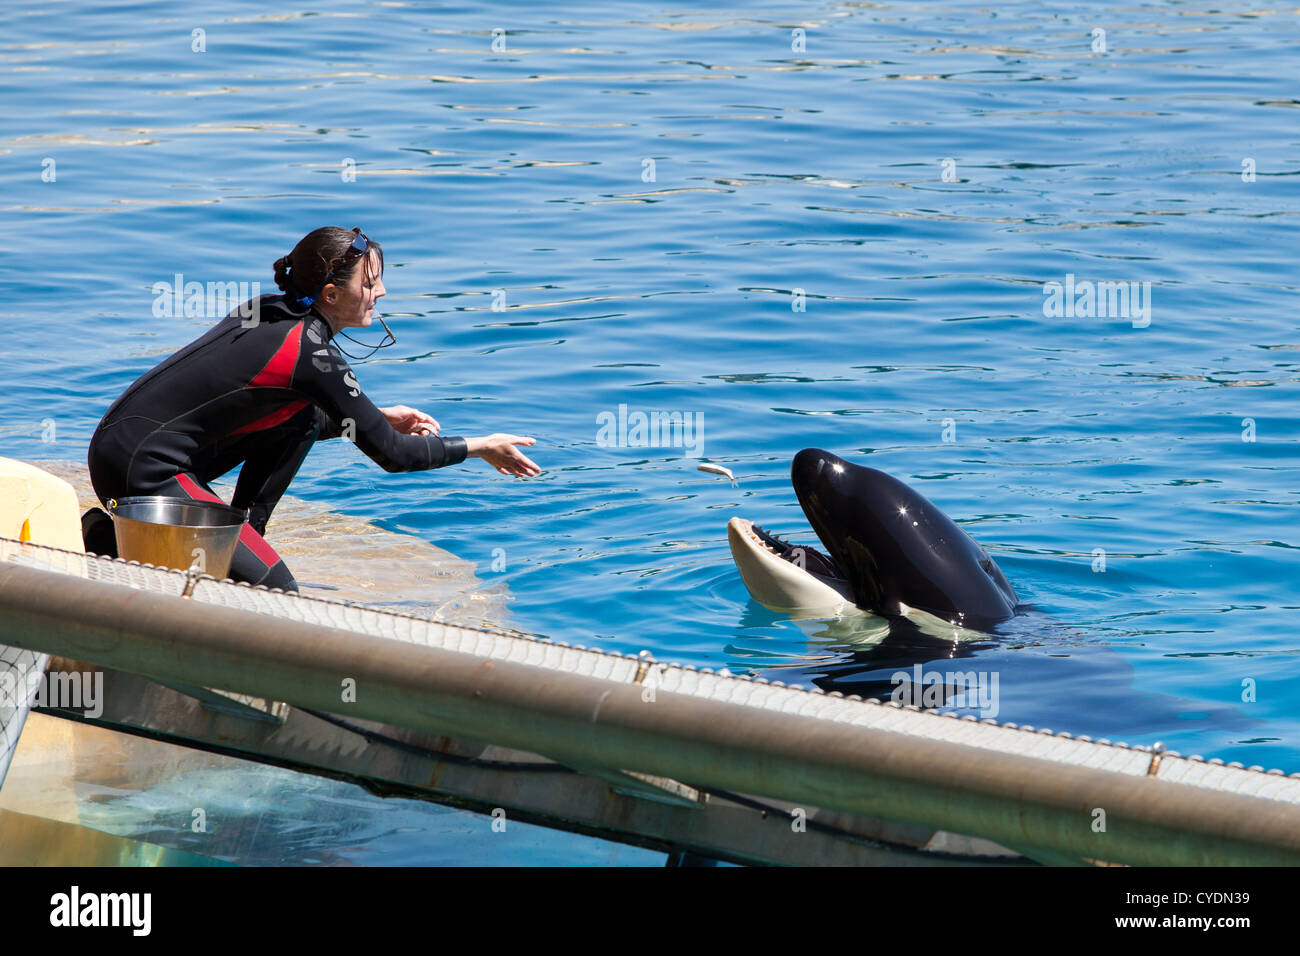 Marineland, Antibes, France - May 3, 2012: female animal trainer working with killer whales Stock Photo